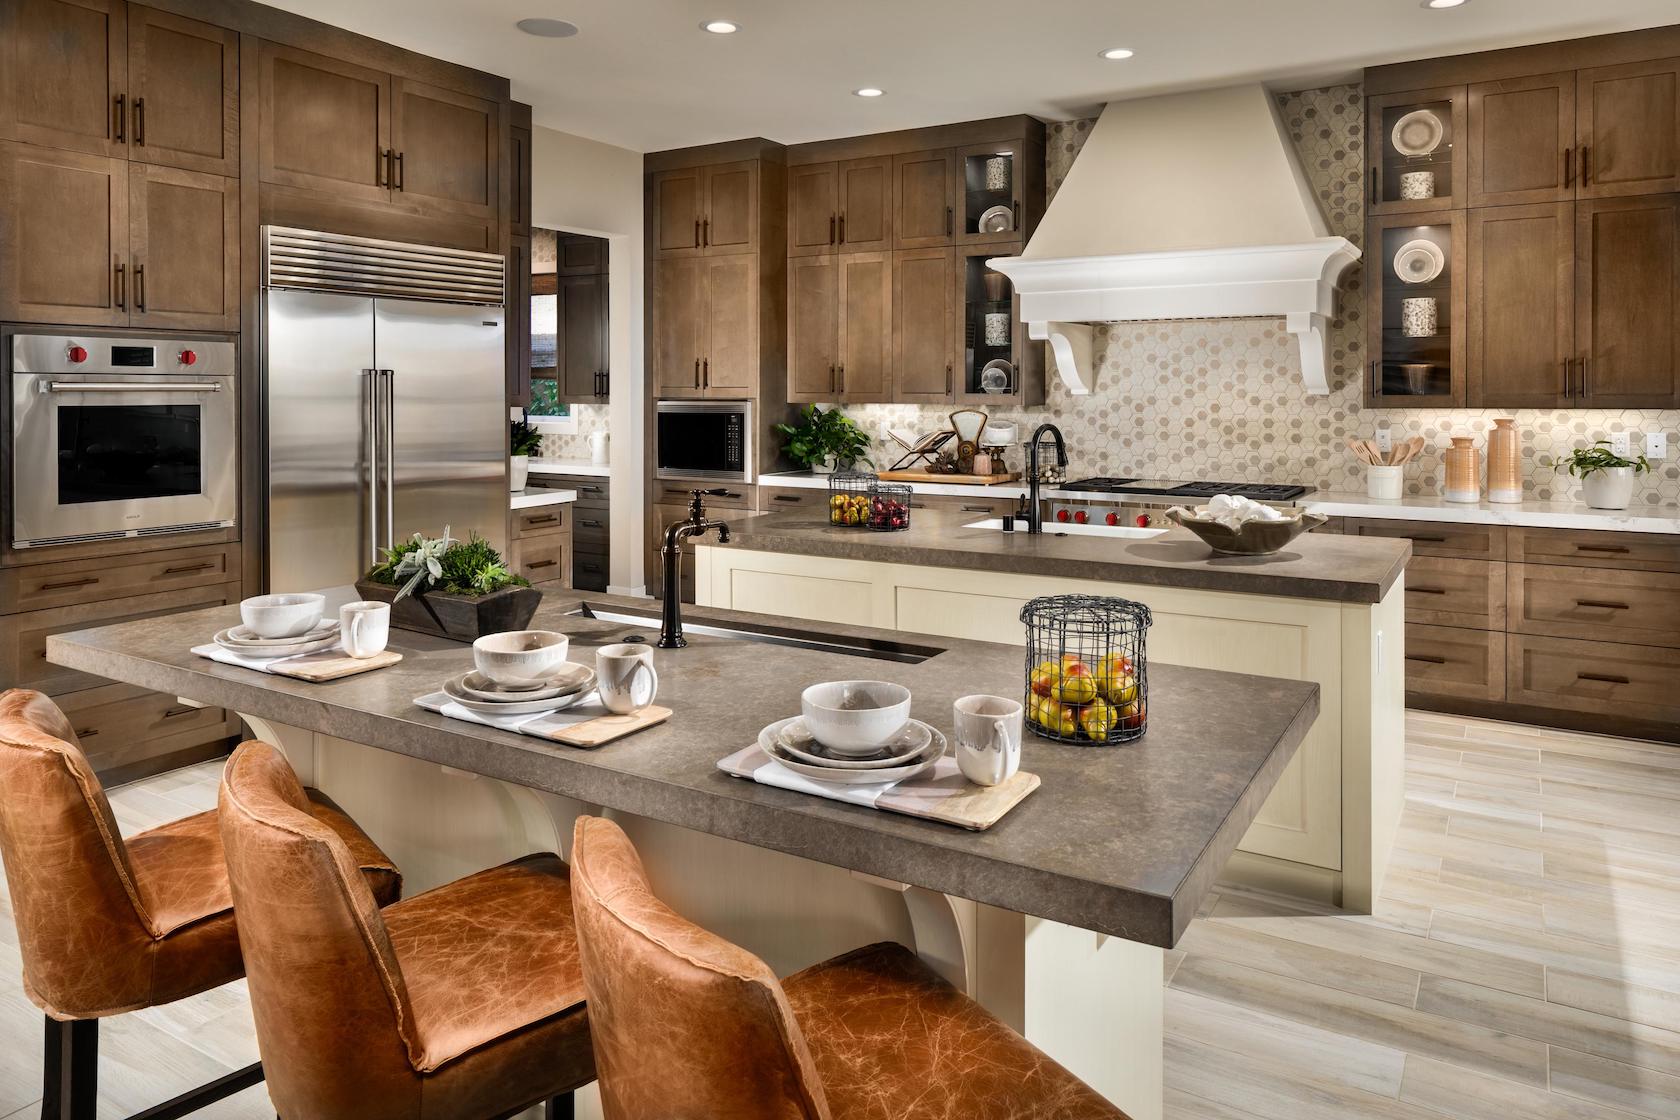 25 Double Island Kitchen Ideas for Your Custom Home